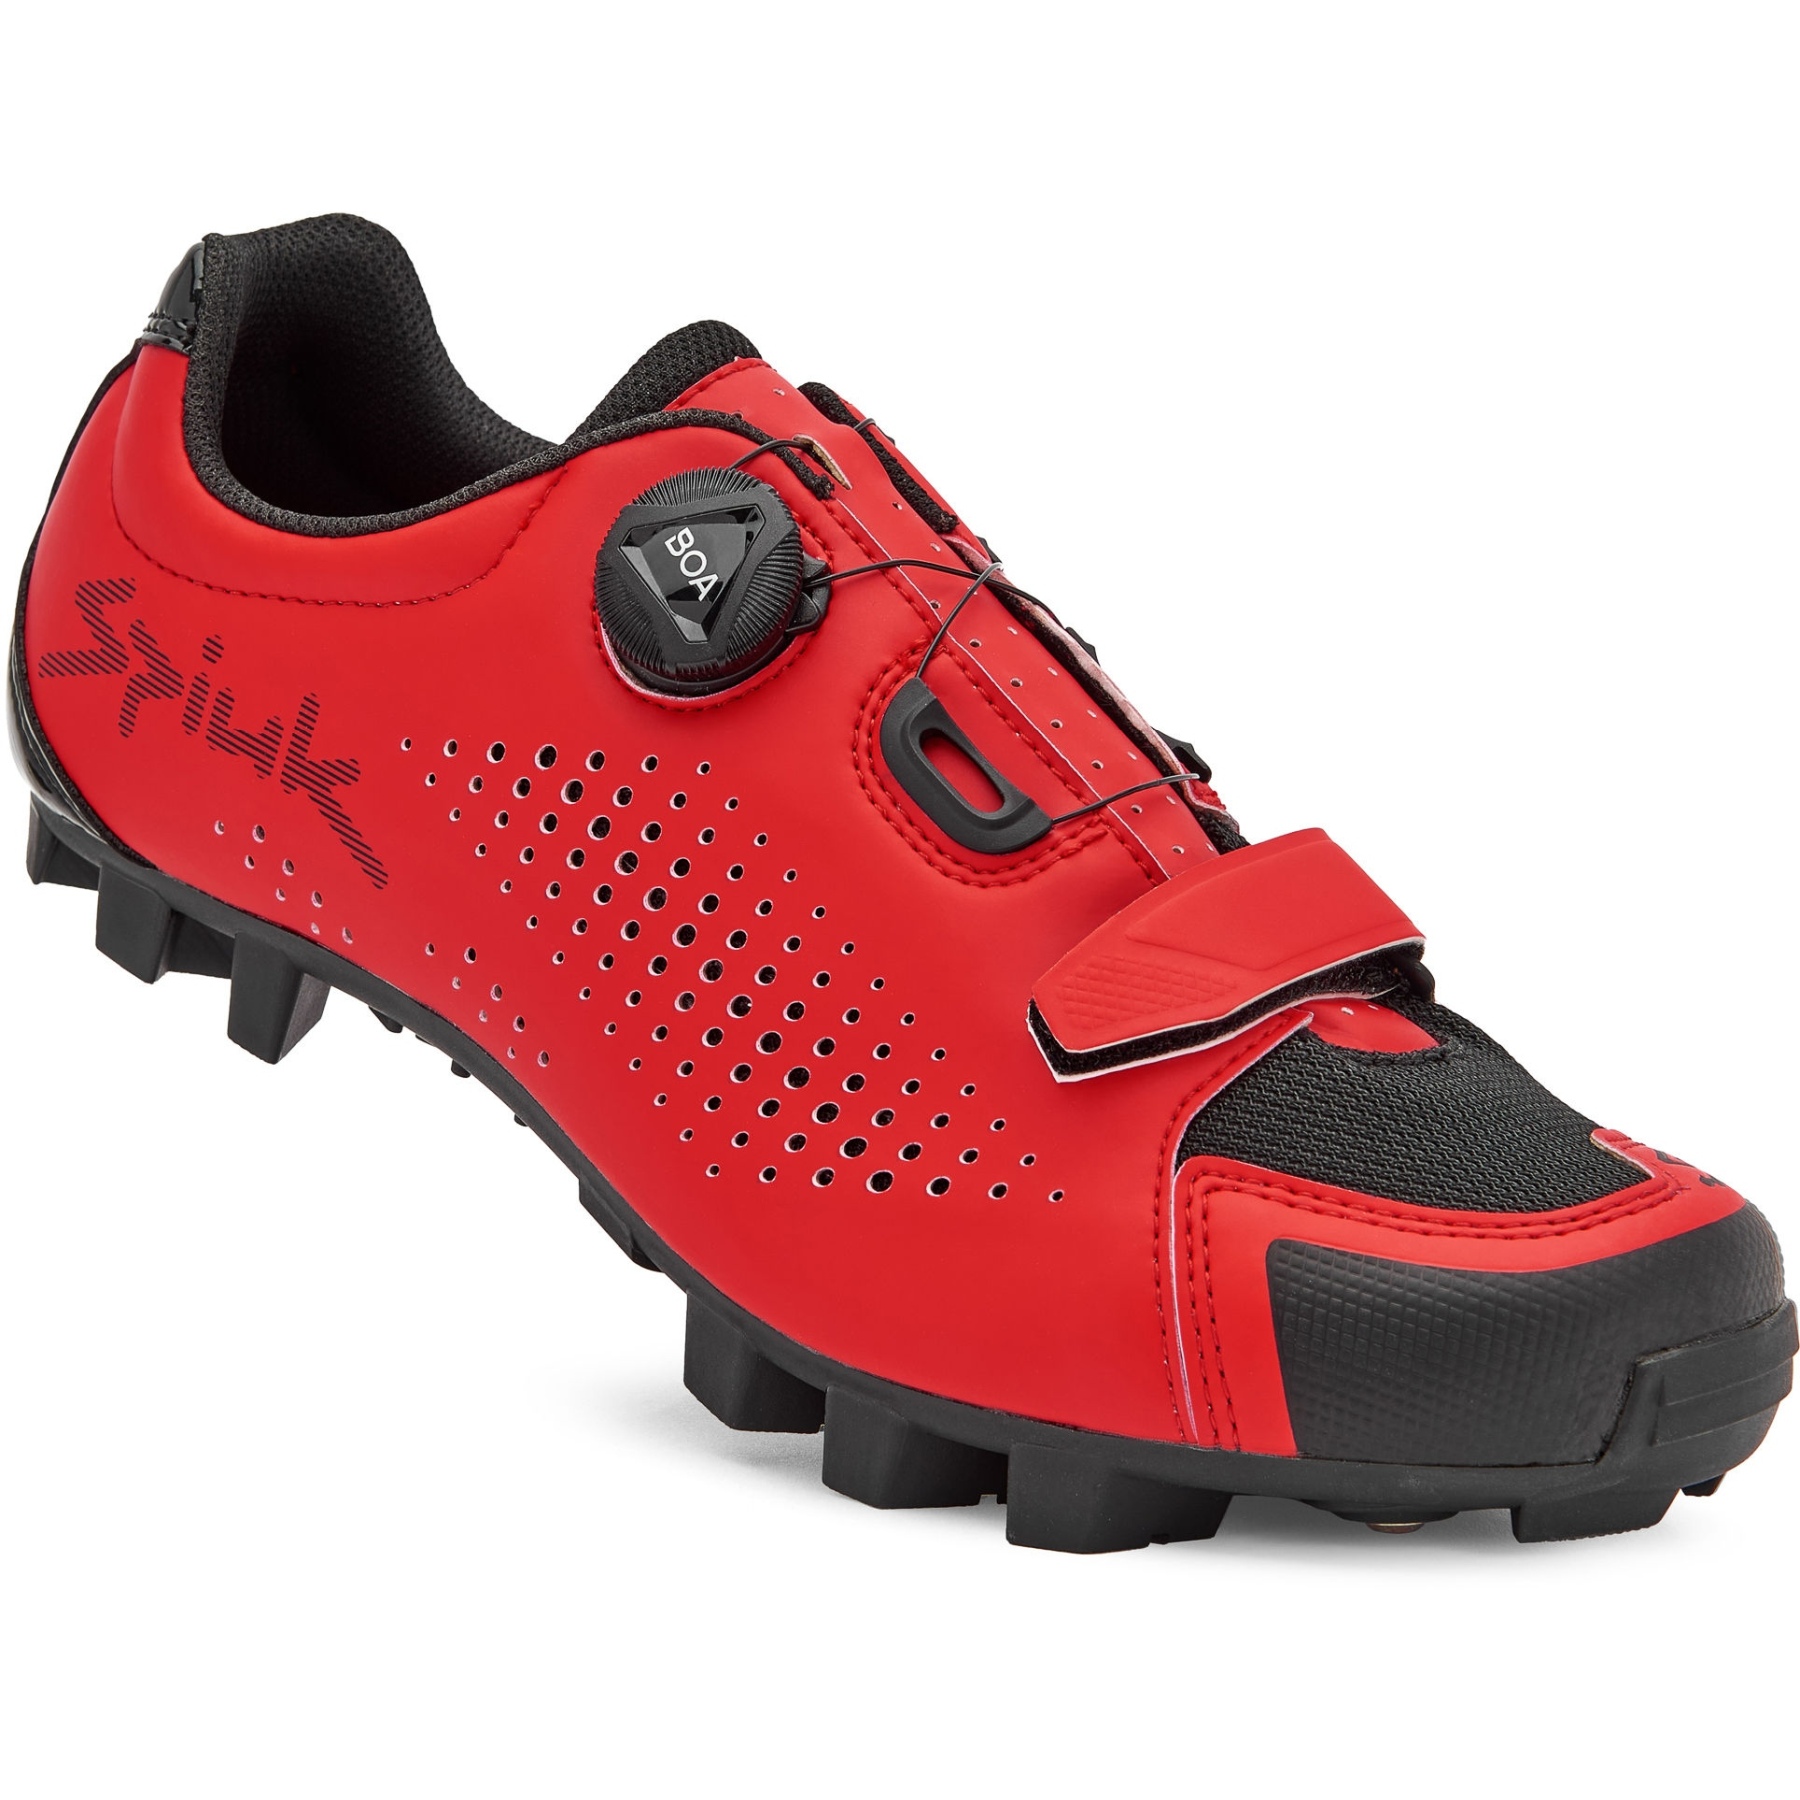 Picture of Spiuk Mondie MTB Shoe - red